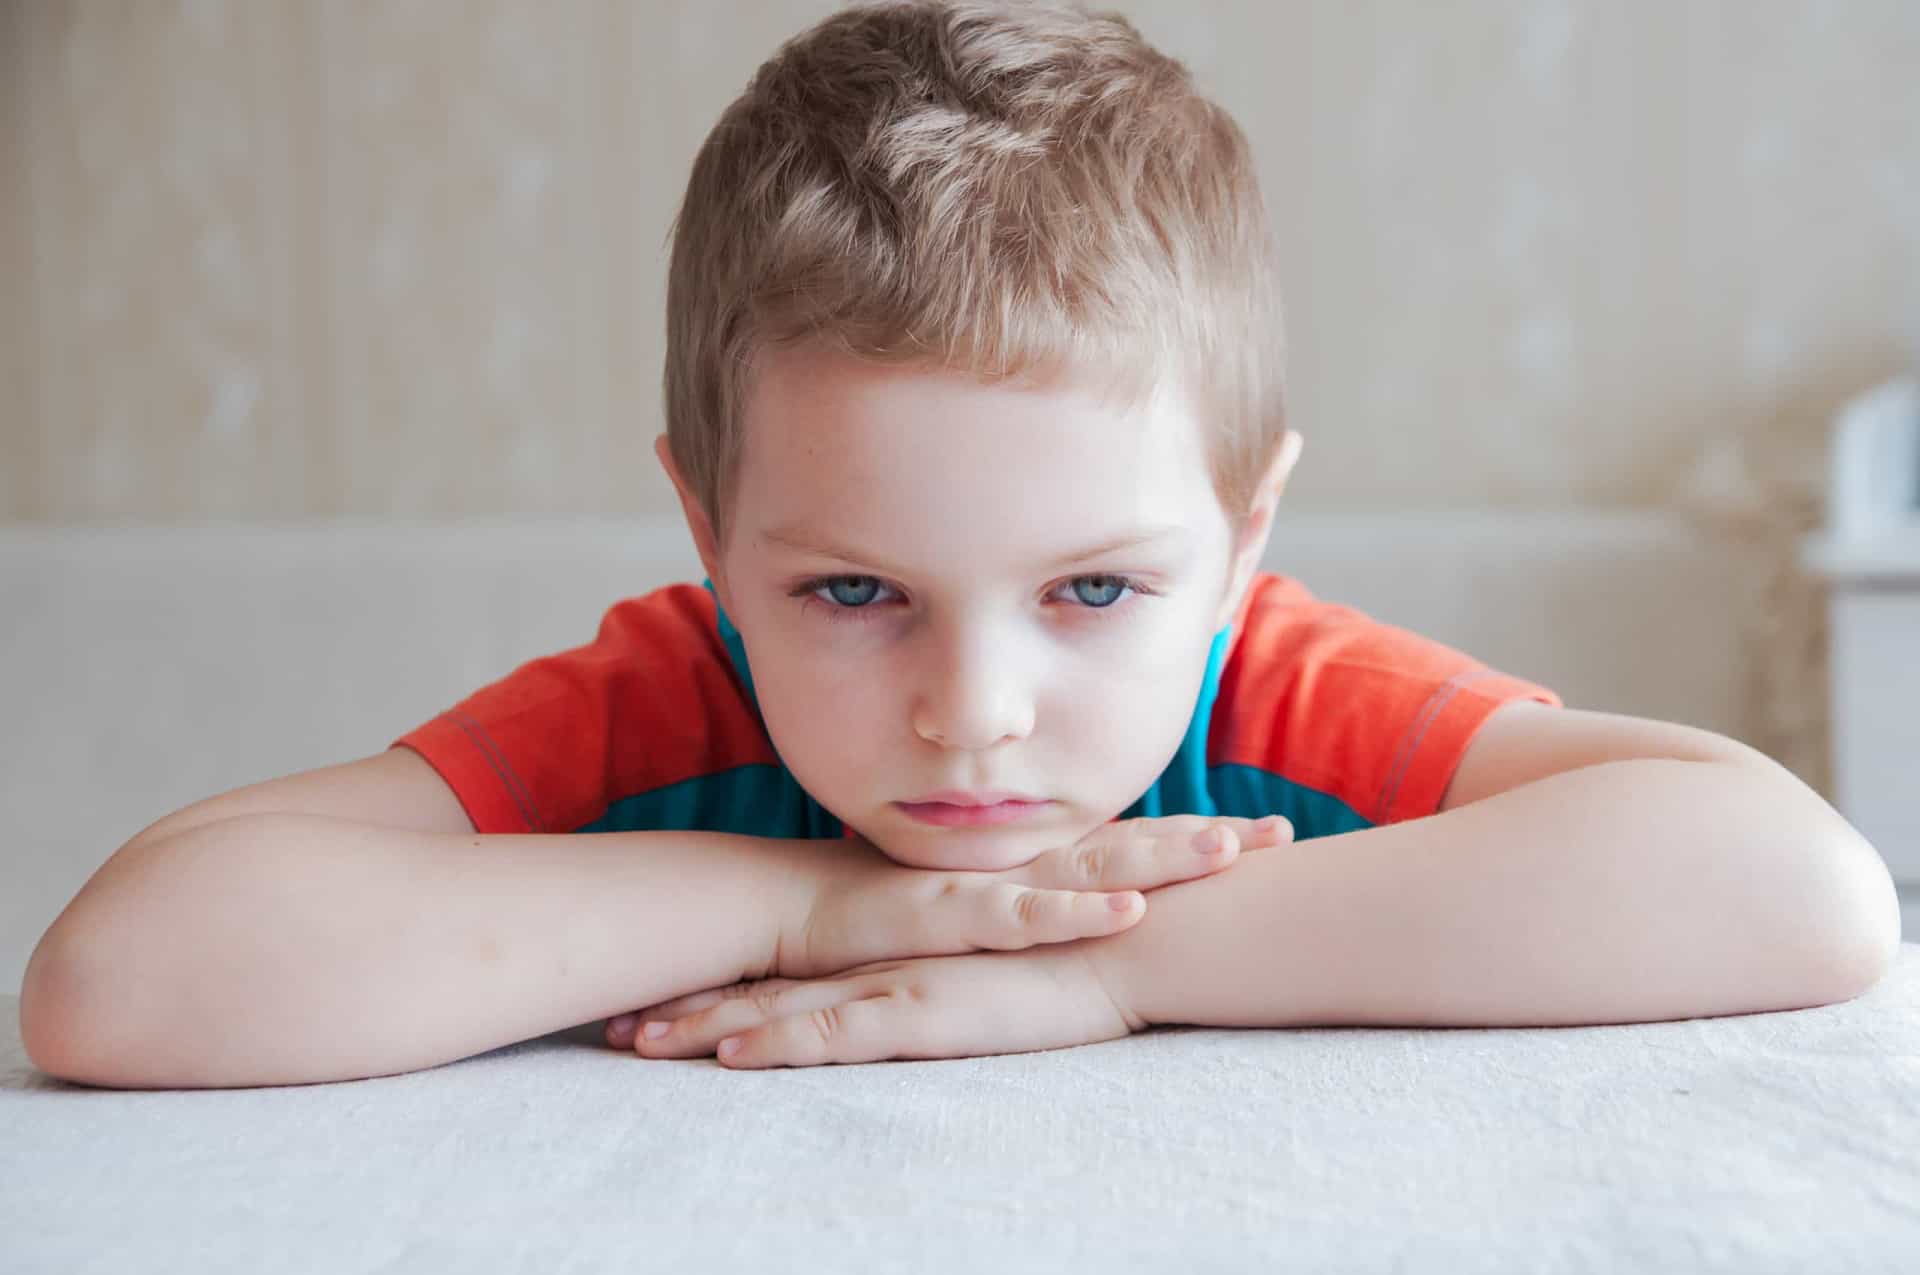 <p><span>Selective mutism normally develops during childhood, and in certain cases it can continue into adulthood. </span></p><p>You may also like:<a href="https://www.starsinsider.com/n/179302?utm_source=msn.com&utm_medium=display&utm_campaign=referral_description&utm_content=521574en-sg"> American actors who've served their country</a></p>